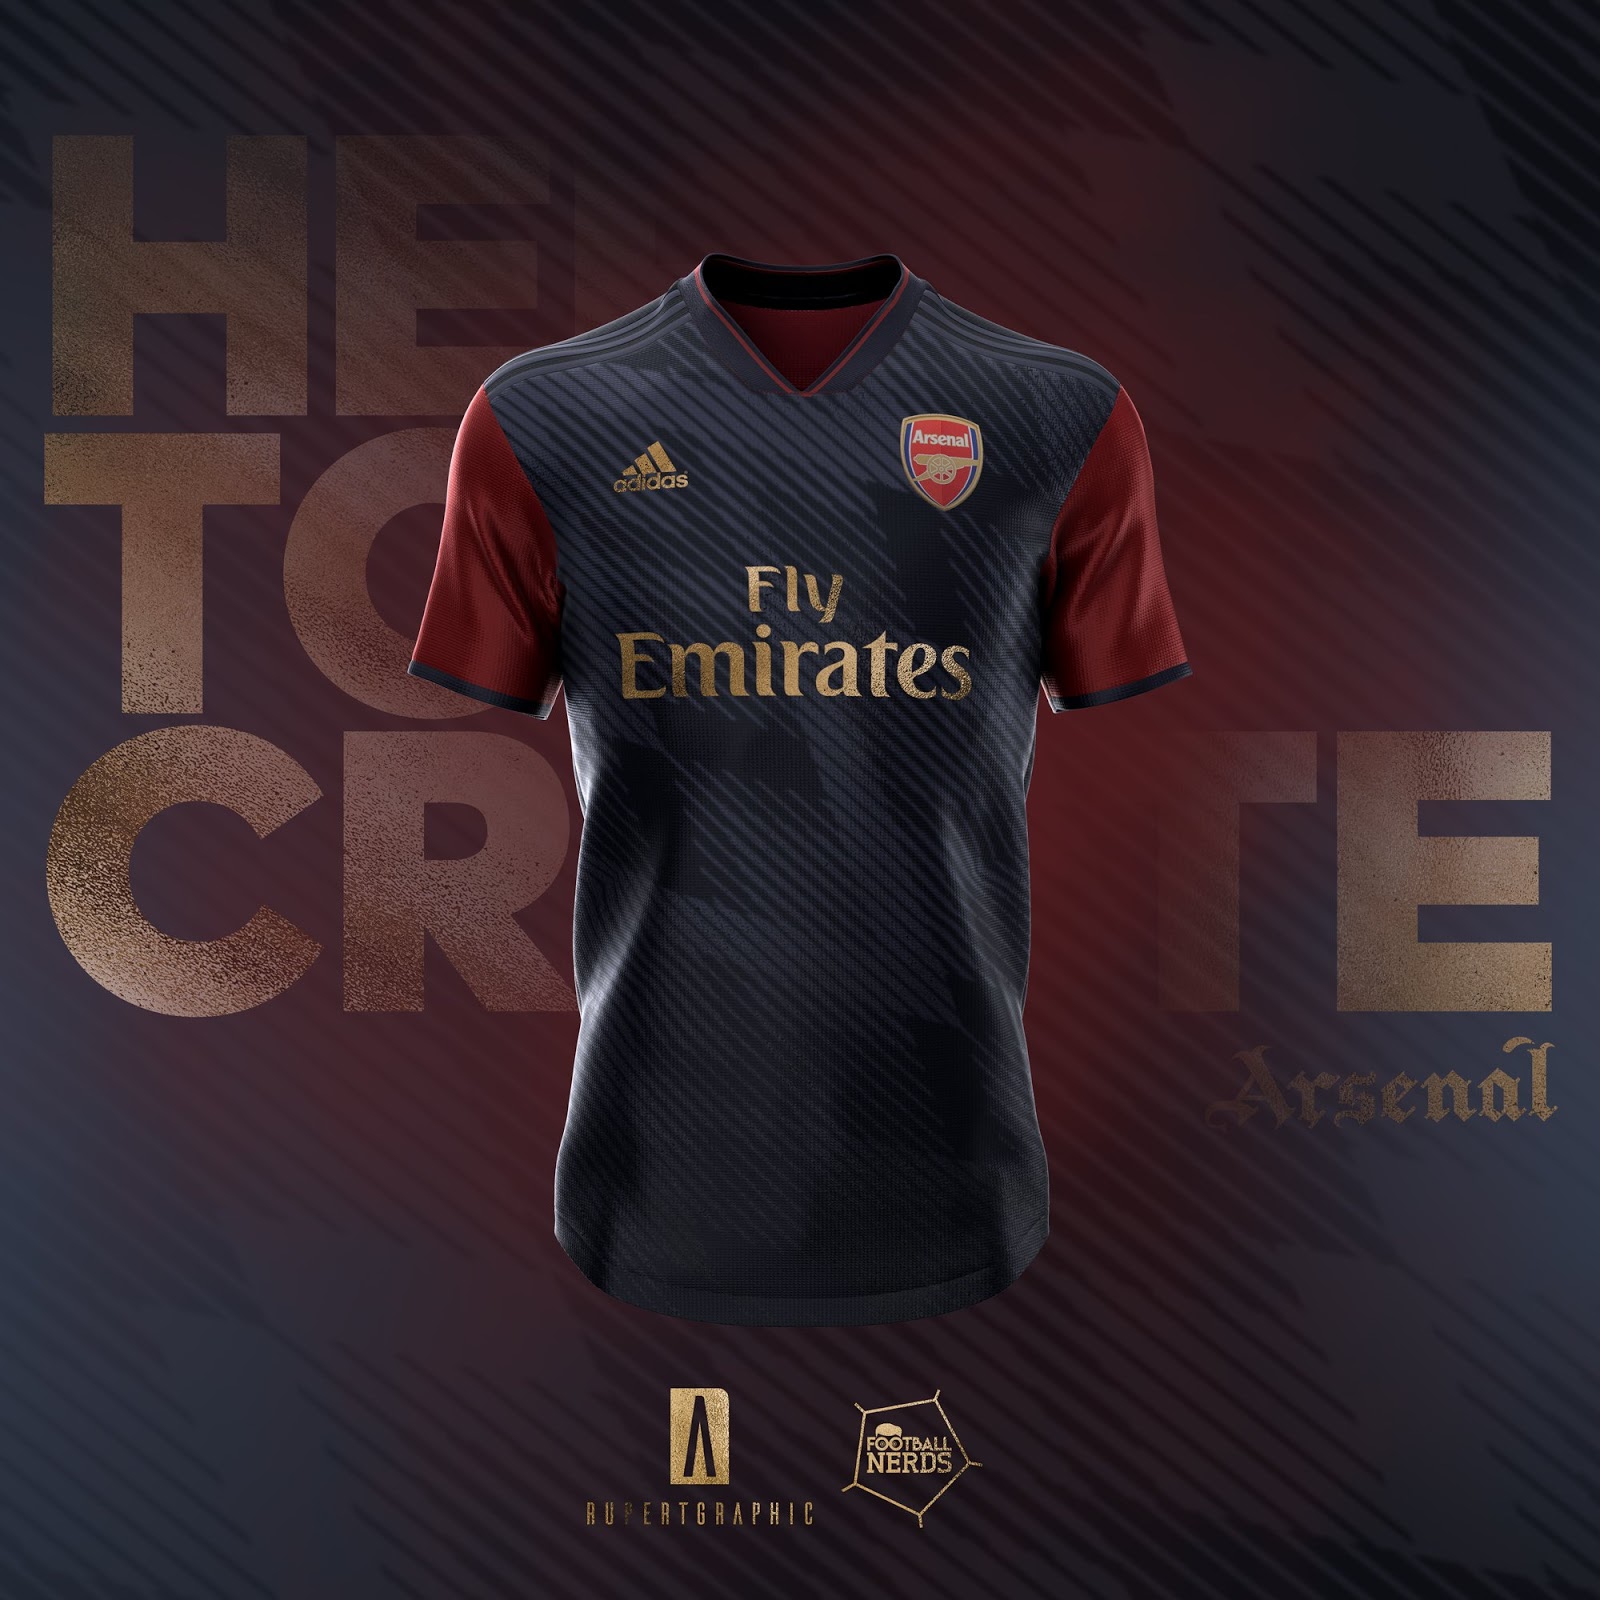 Stunning Adidas Arsenal 19-20 Home, Away & Third Kit Concepts by ...